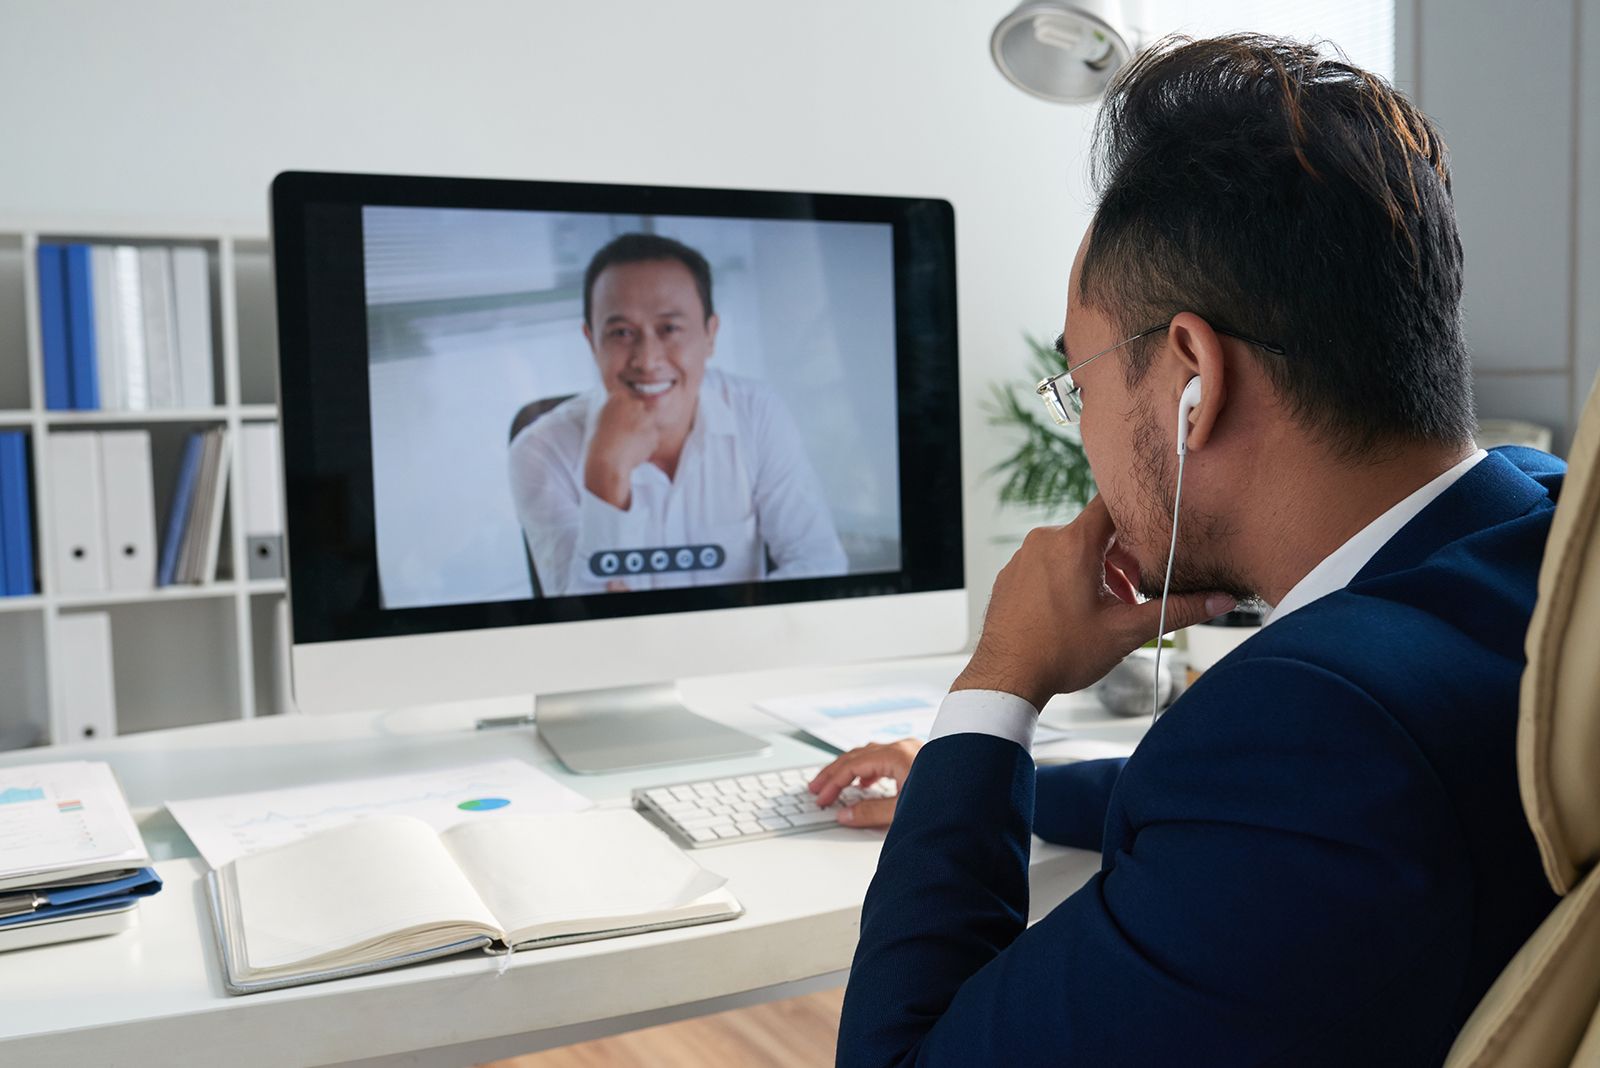 5 Steps to Holding a Virtual Meeting